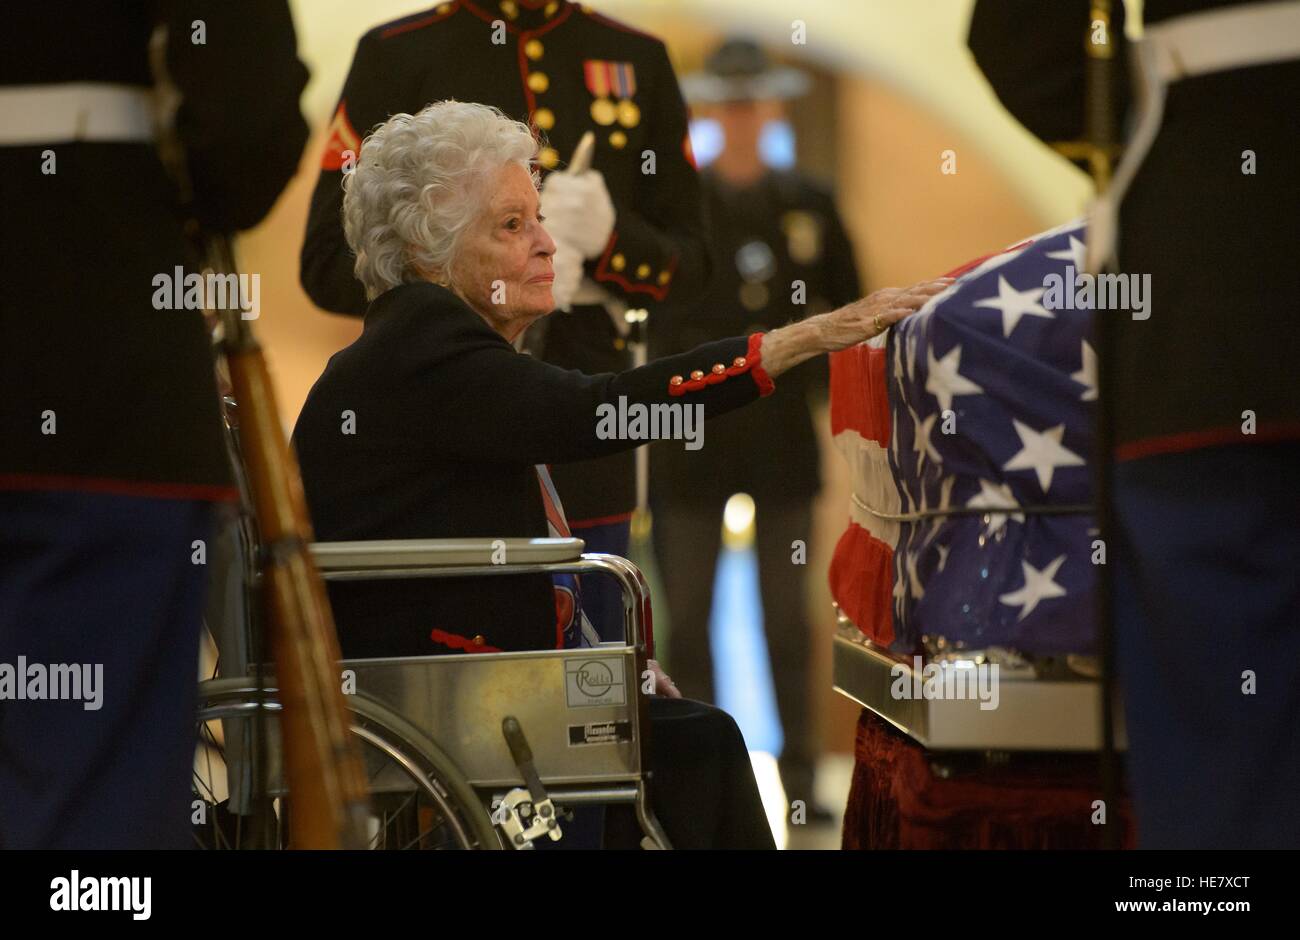 Annie Glenn, Widow of astronaut and former Senator John Glenn reaches out to touch the casket of her husband lying in repose at the Ohio State House December 16, 2016 in Columbus, Ohio. The former Marine pilot, Senator and first man to orbit the earth died last week at the age of 95. Stock Photo